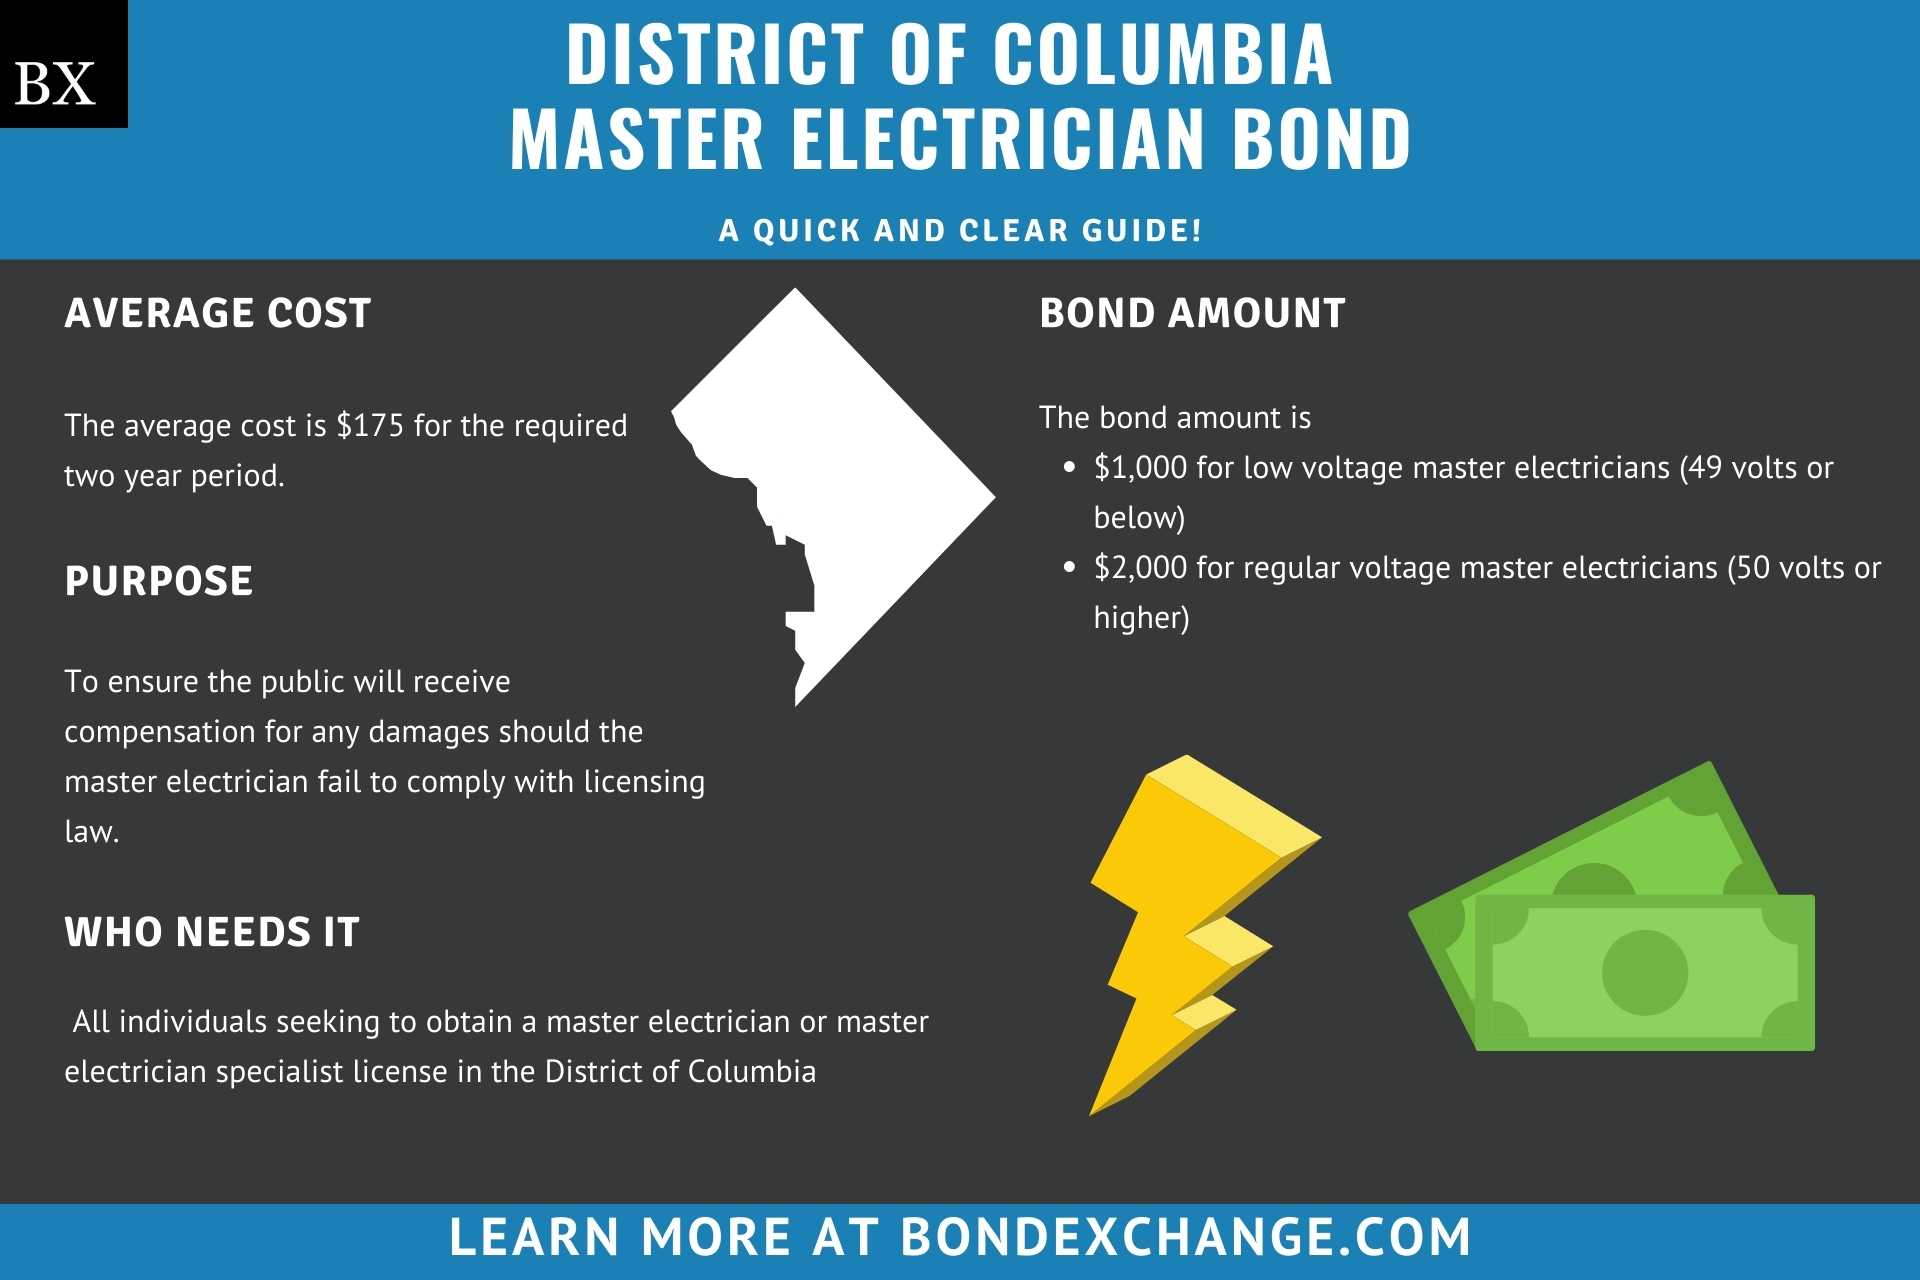 Who Regulates PlumbingGas Fitting Contractor Bond's in the District of Columbia Bonds Infographic